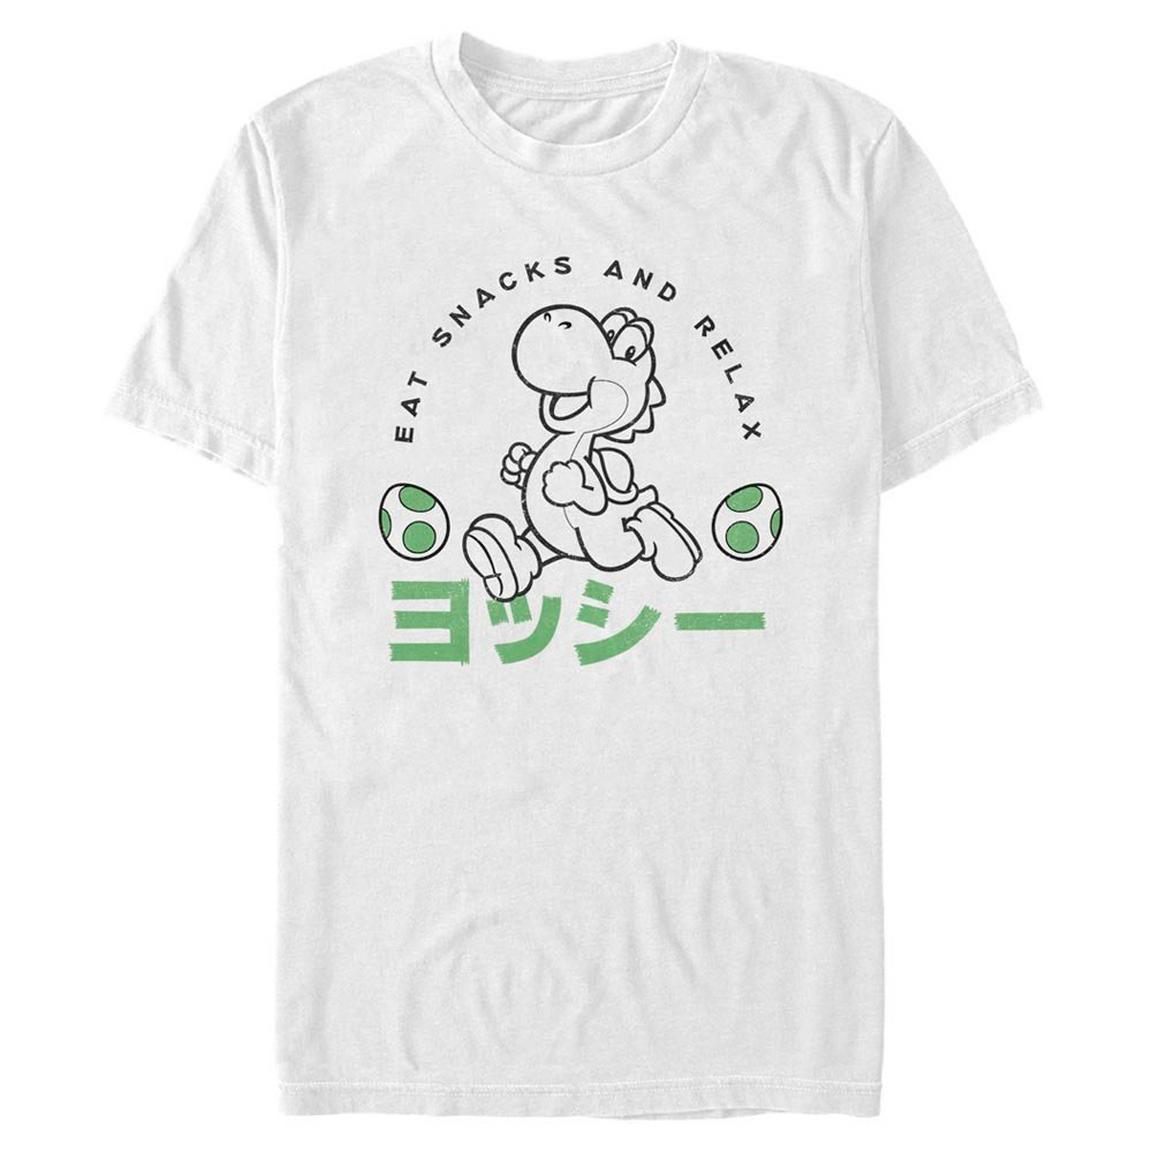 Super Mario Yoshi Eat Snacks and Relax T-Shirt, Size: XL, Fifth Sun